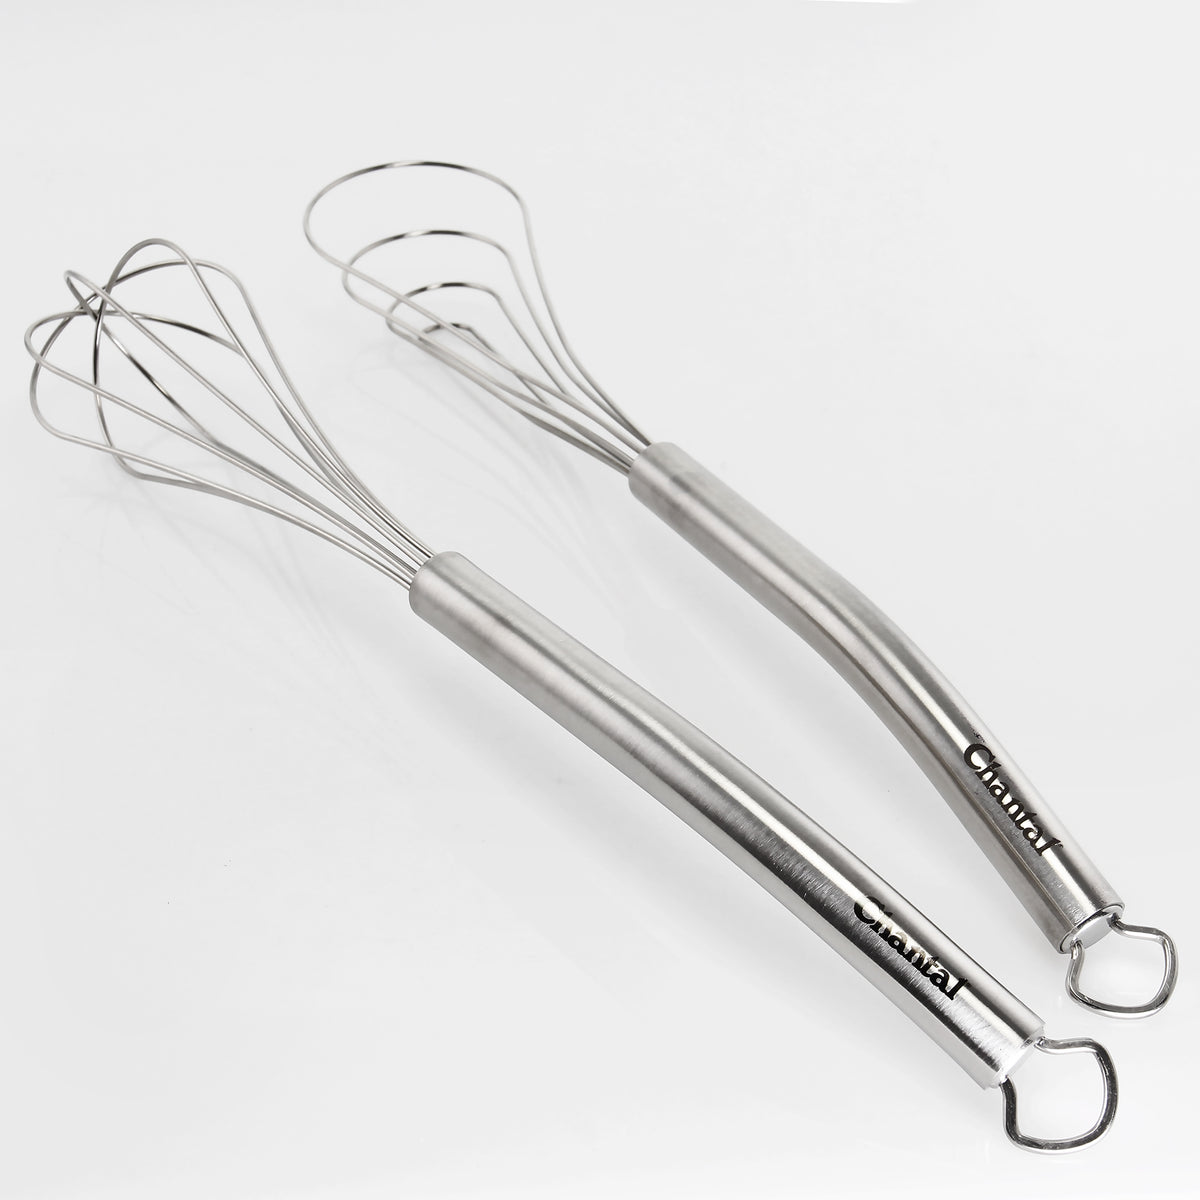 Flat Whisk 10-inch Stainless